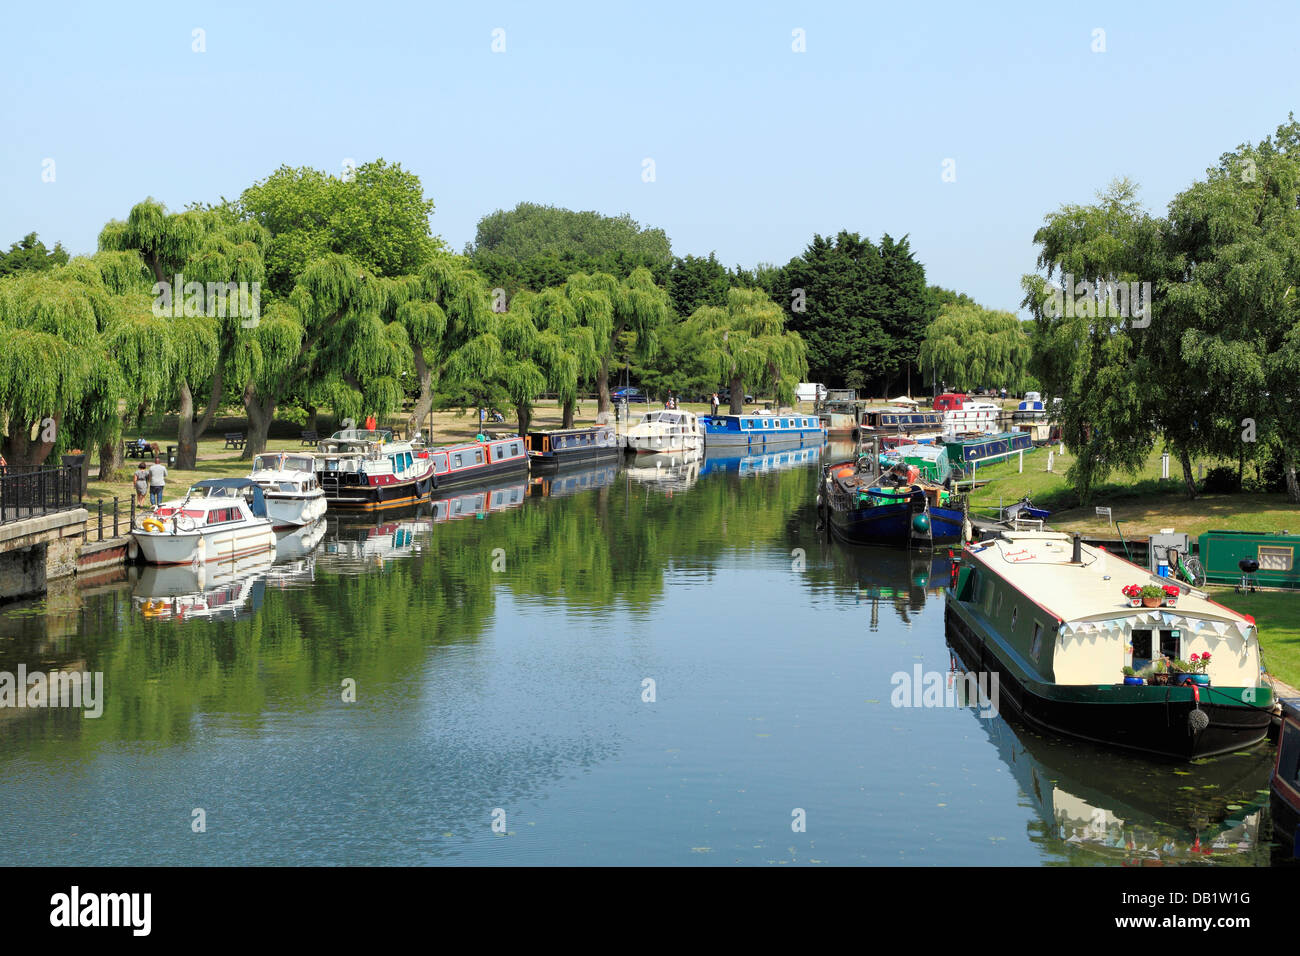 Ely, River Ouse, barges and boats,  English rivers riverside pubs inns pub, Cambridgeshire England UK Stock Photo